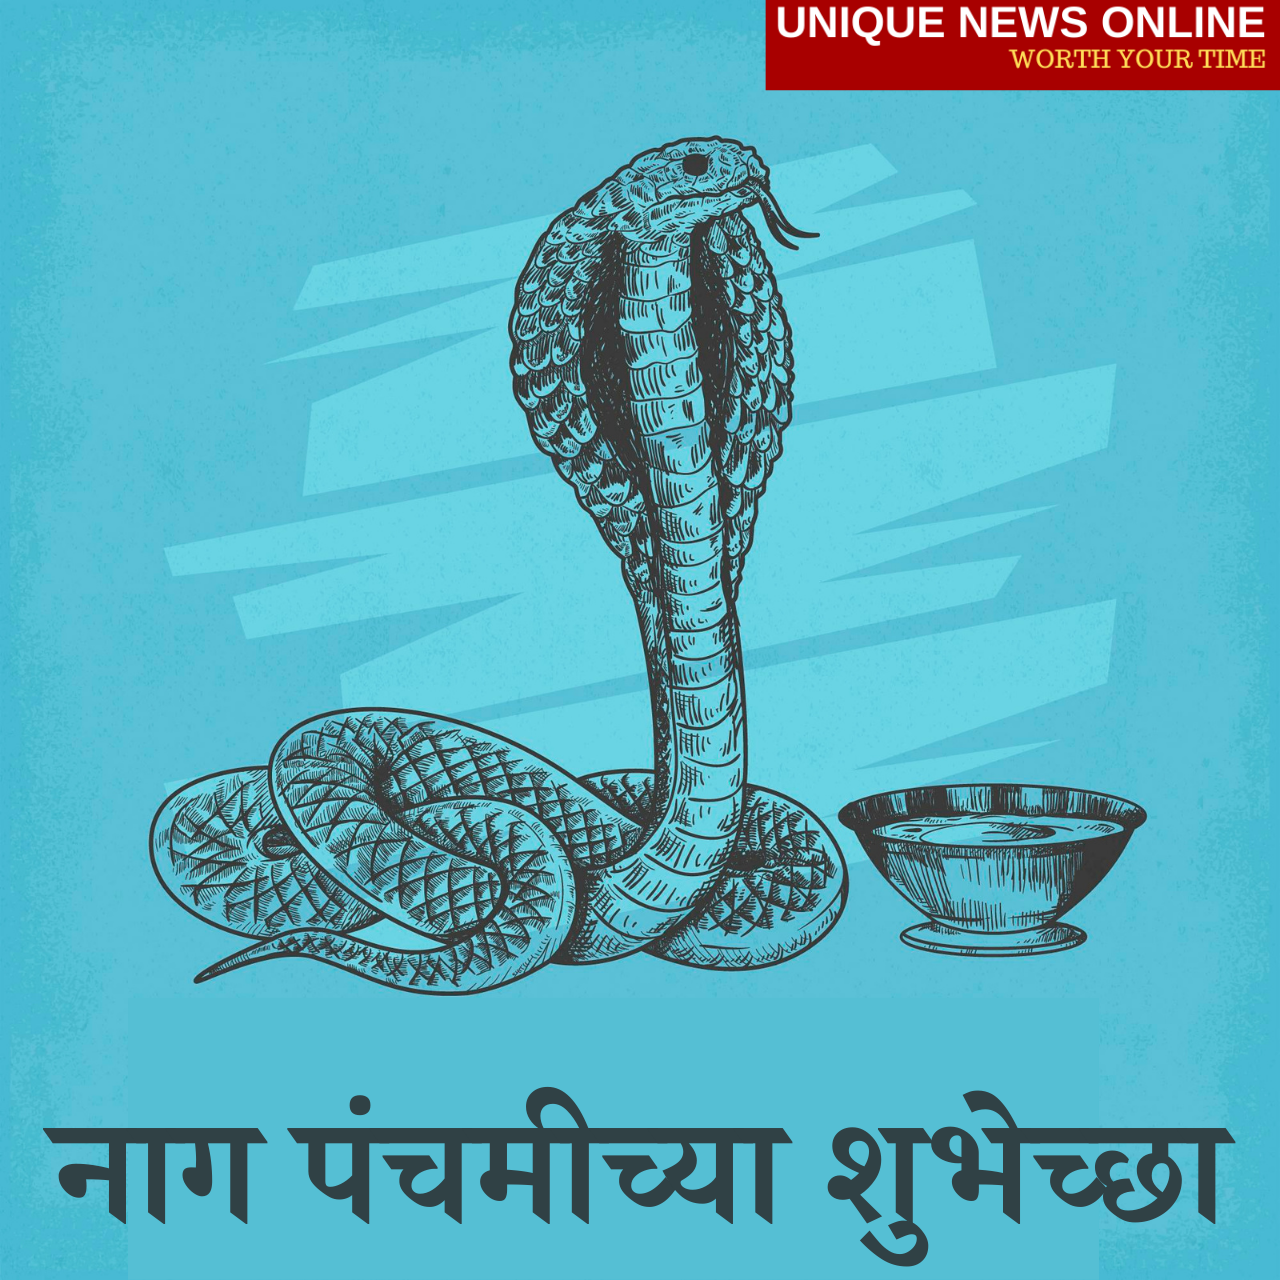 Nag Panchami 2021 Marathi Greetings and Wishes: Quotes, HD Images, Poster,  Stickers, Status, Wallpaper, and Messages